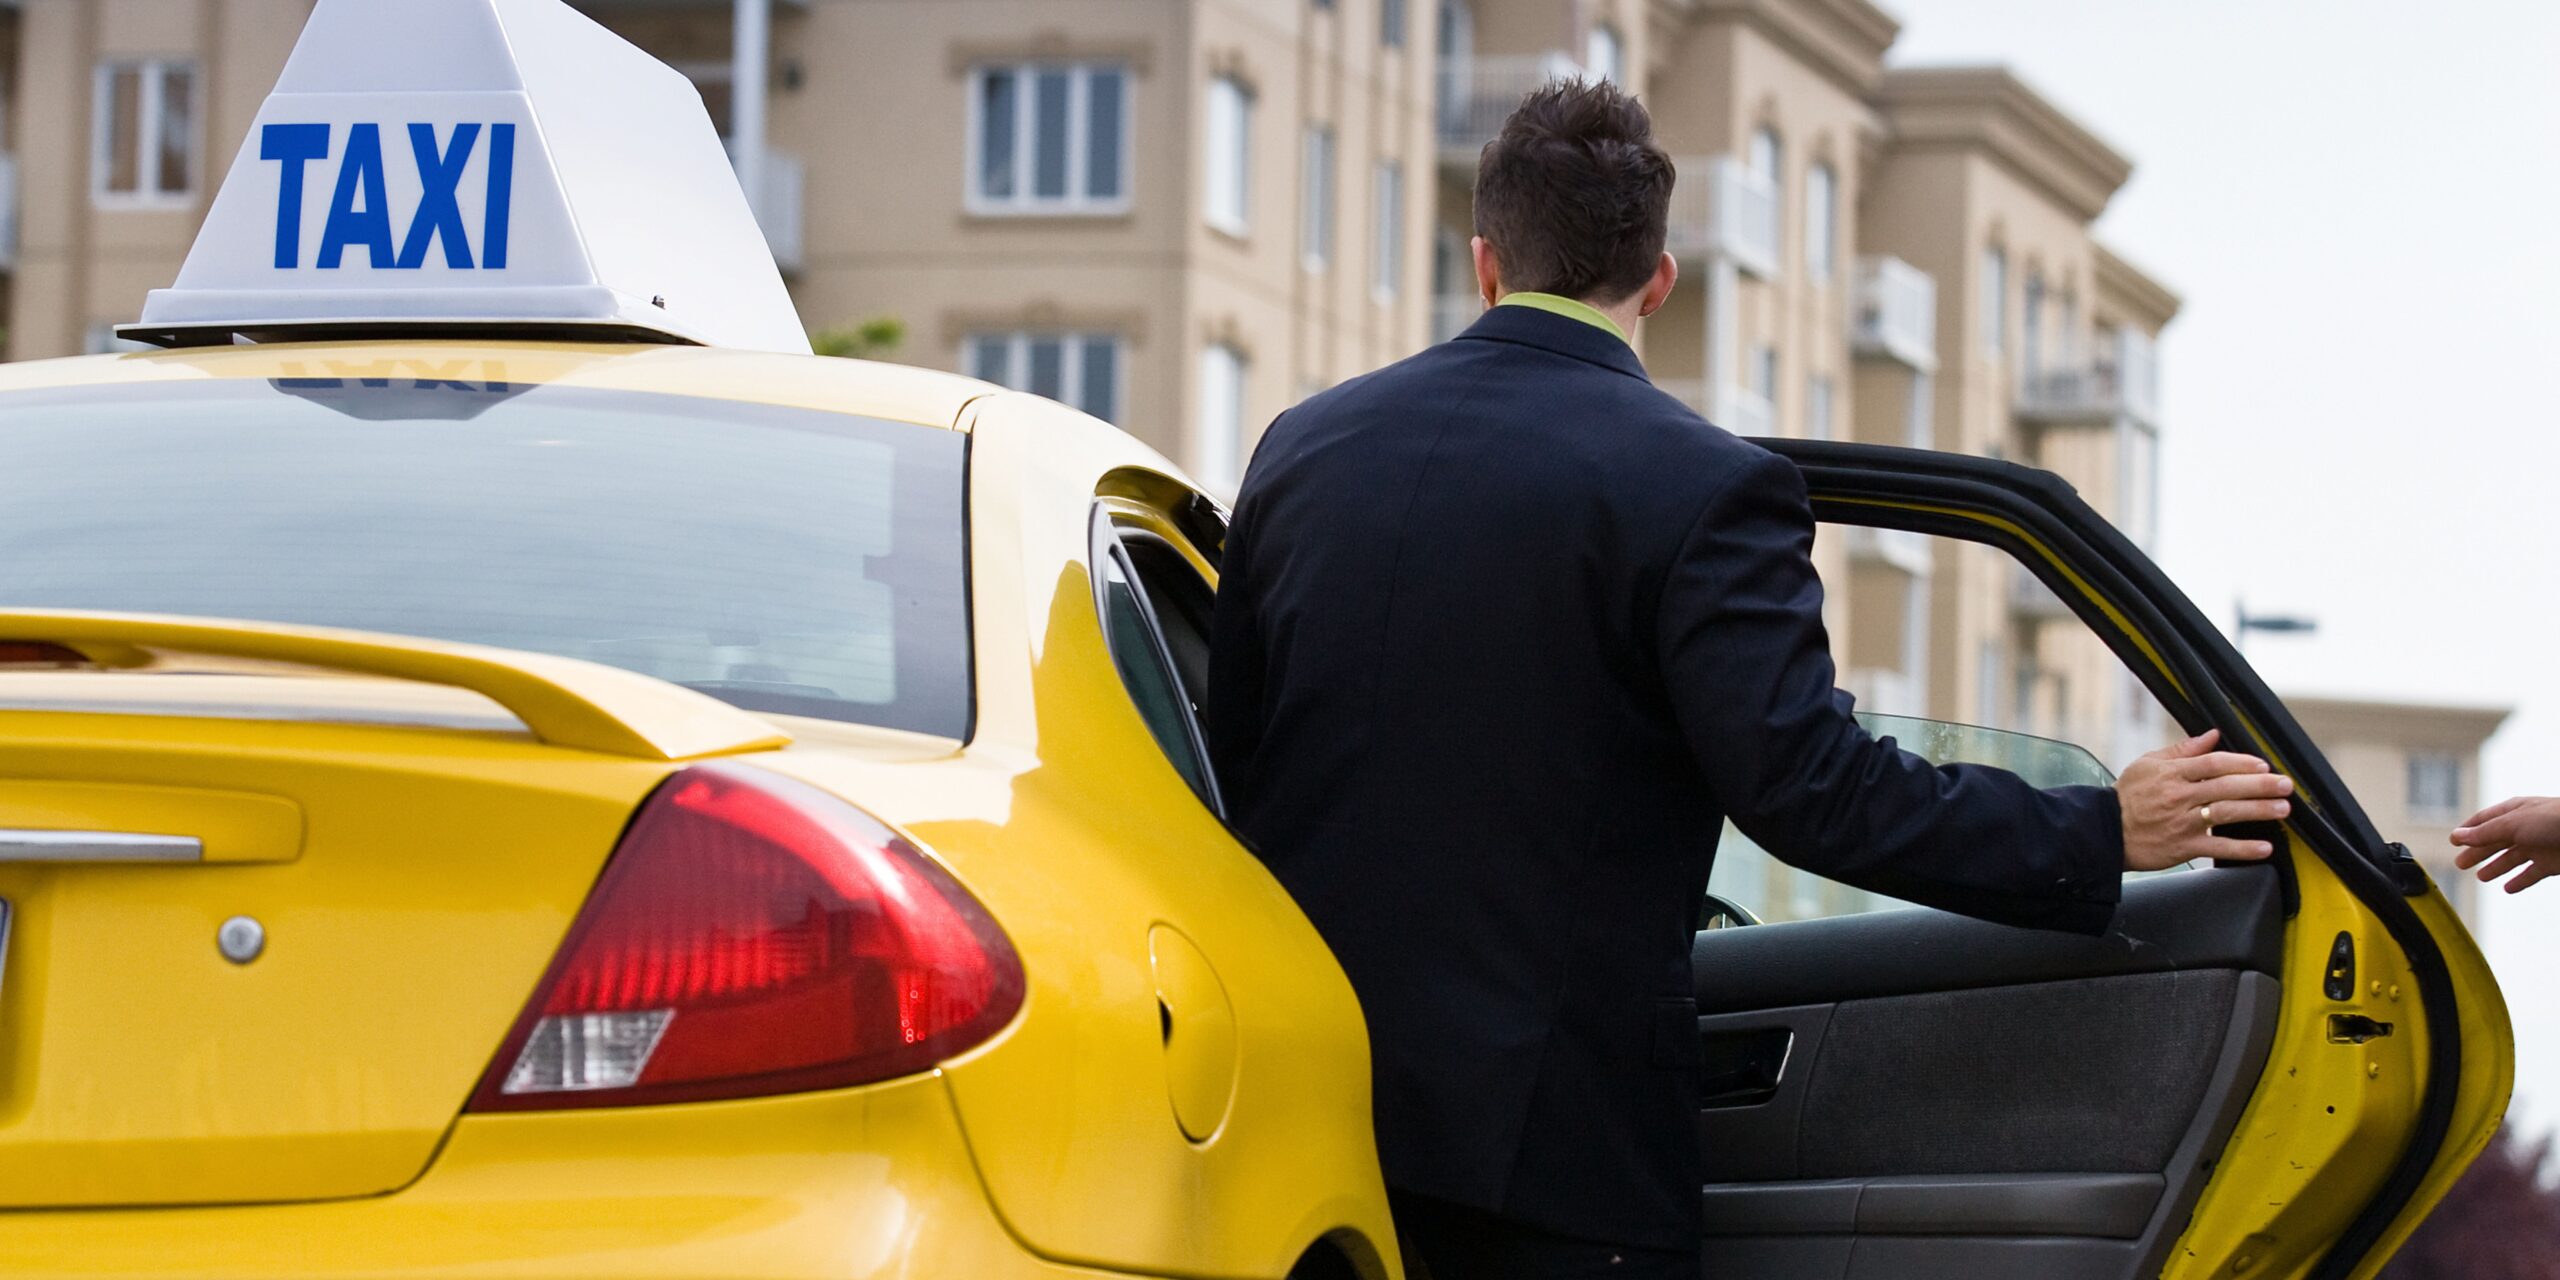 What are the Benefits of Hiring an Airport Taxi from Us?